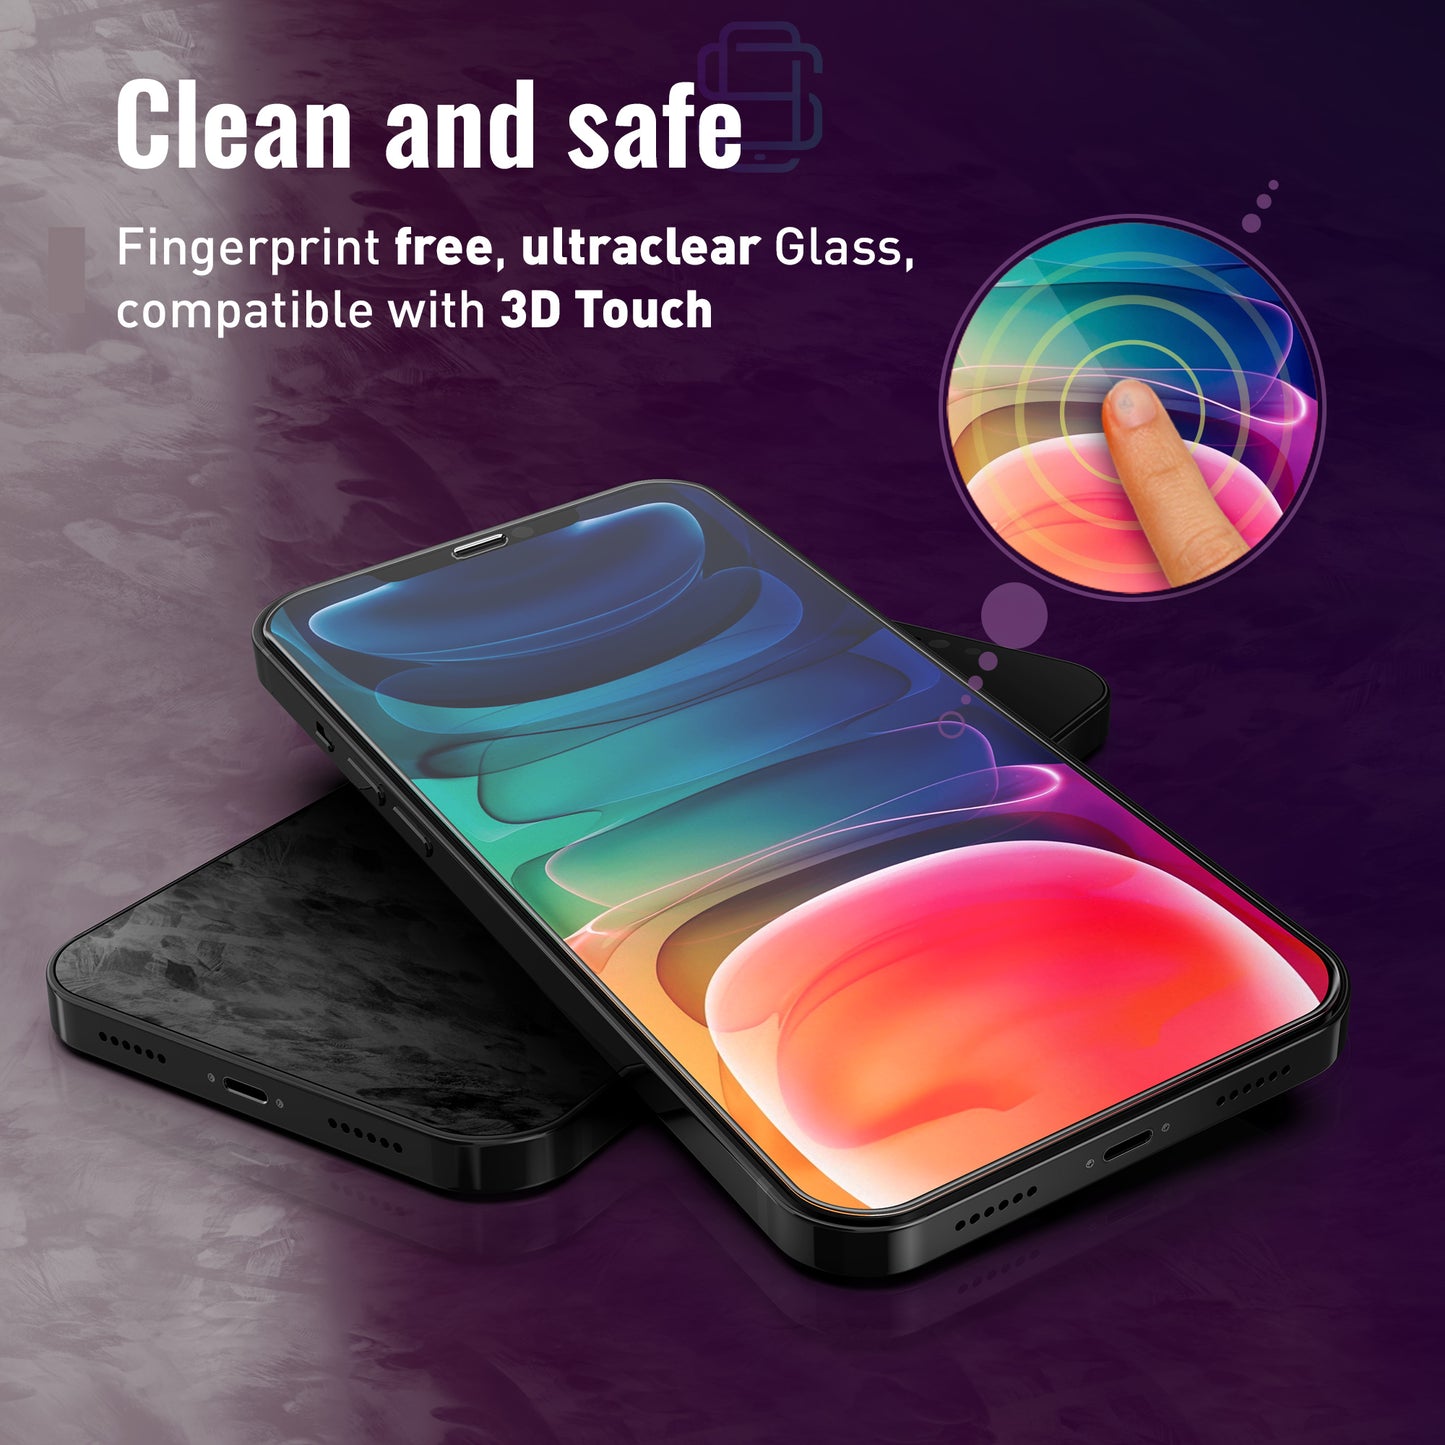 Defenslim iPhone 12 Pro Max Screen Protector [2-Pack] with Easy Auto-Align Install Kit